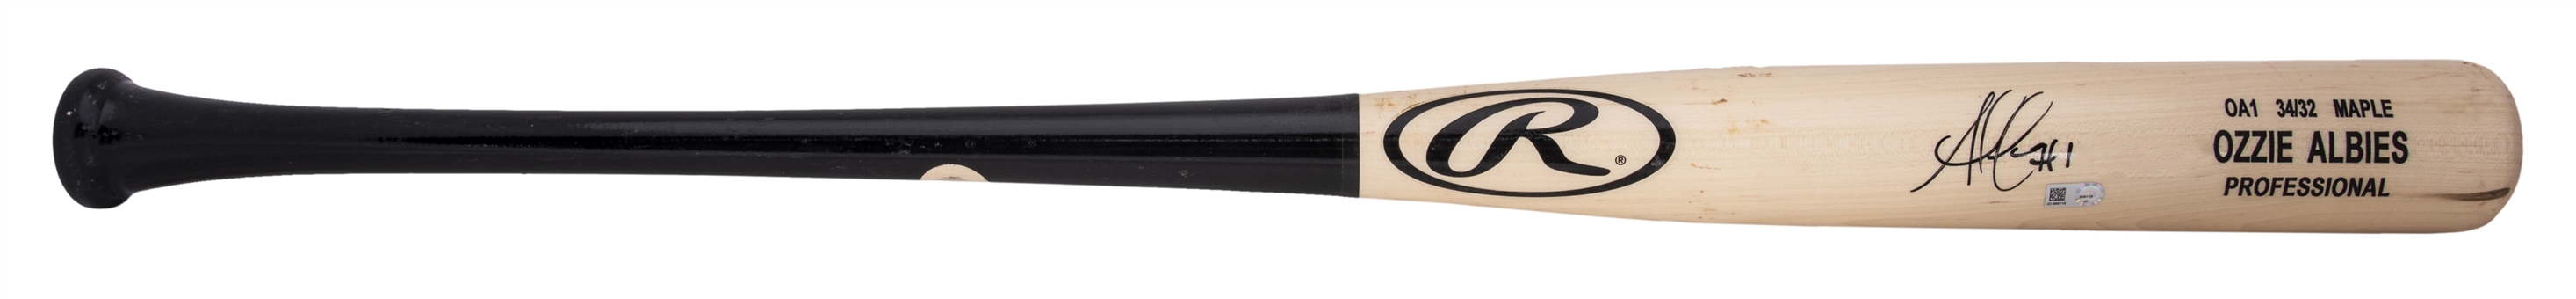 2019 Ozzie Albies Game Used & Signed Rawlings OA1 Model Bat (PSA/DNA & MLB Authenticated)